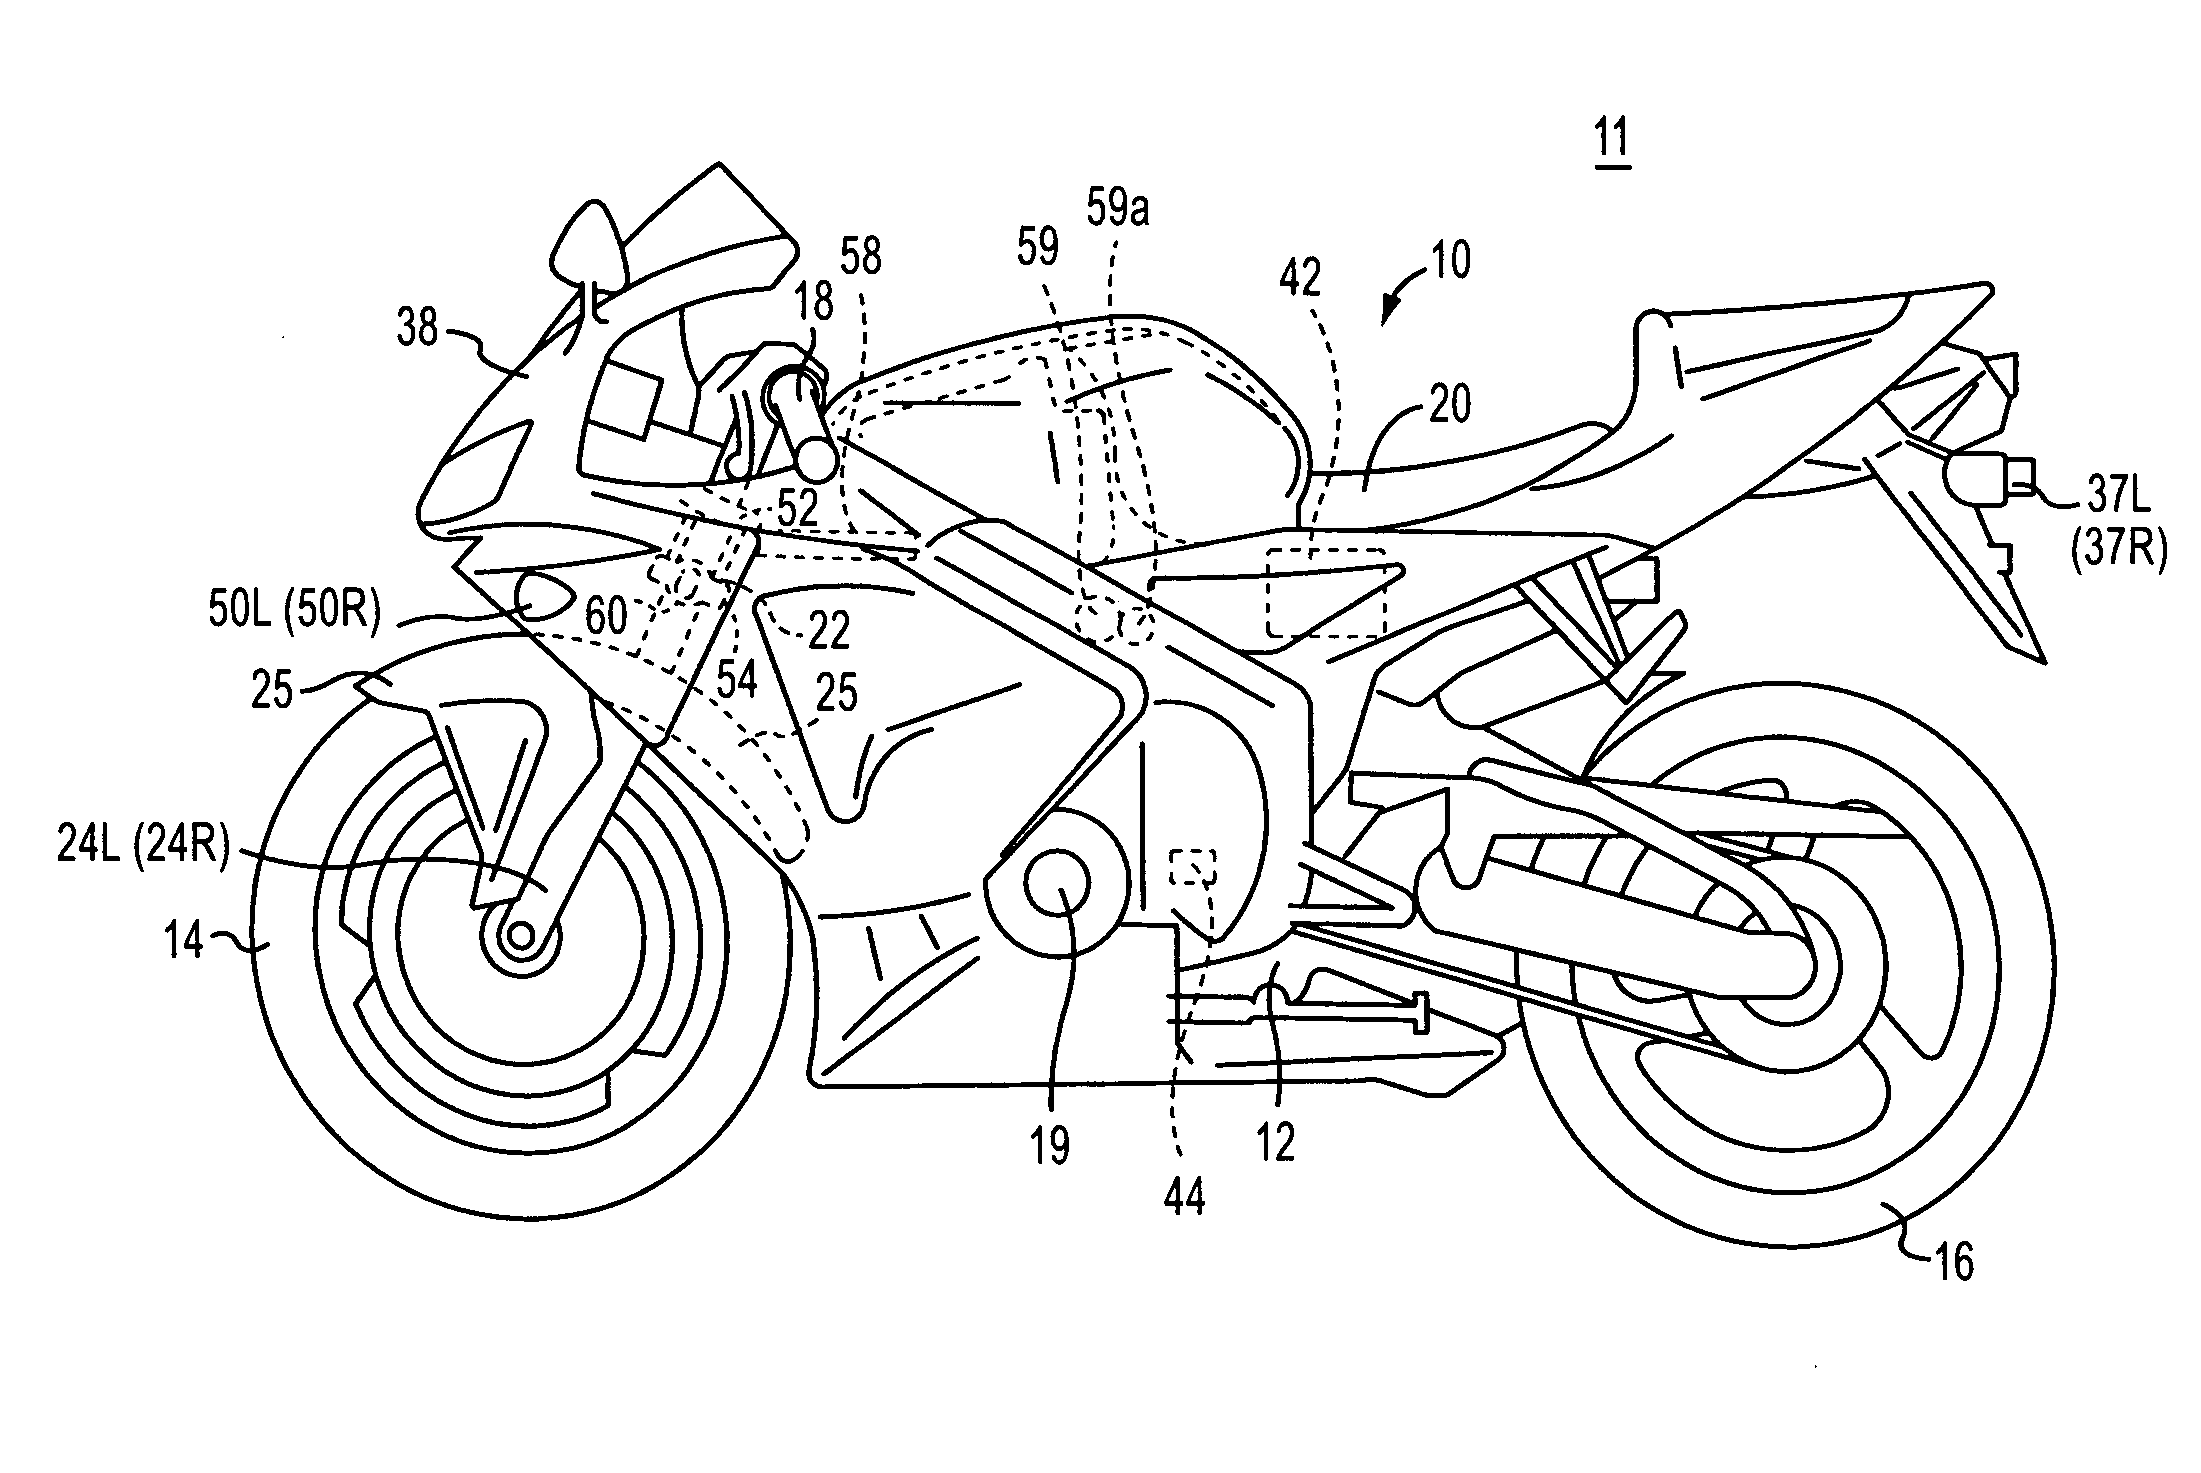 Steering assist system for motorcycle